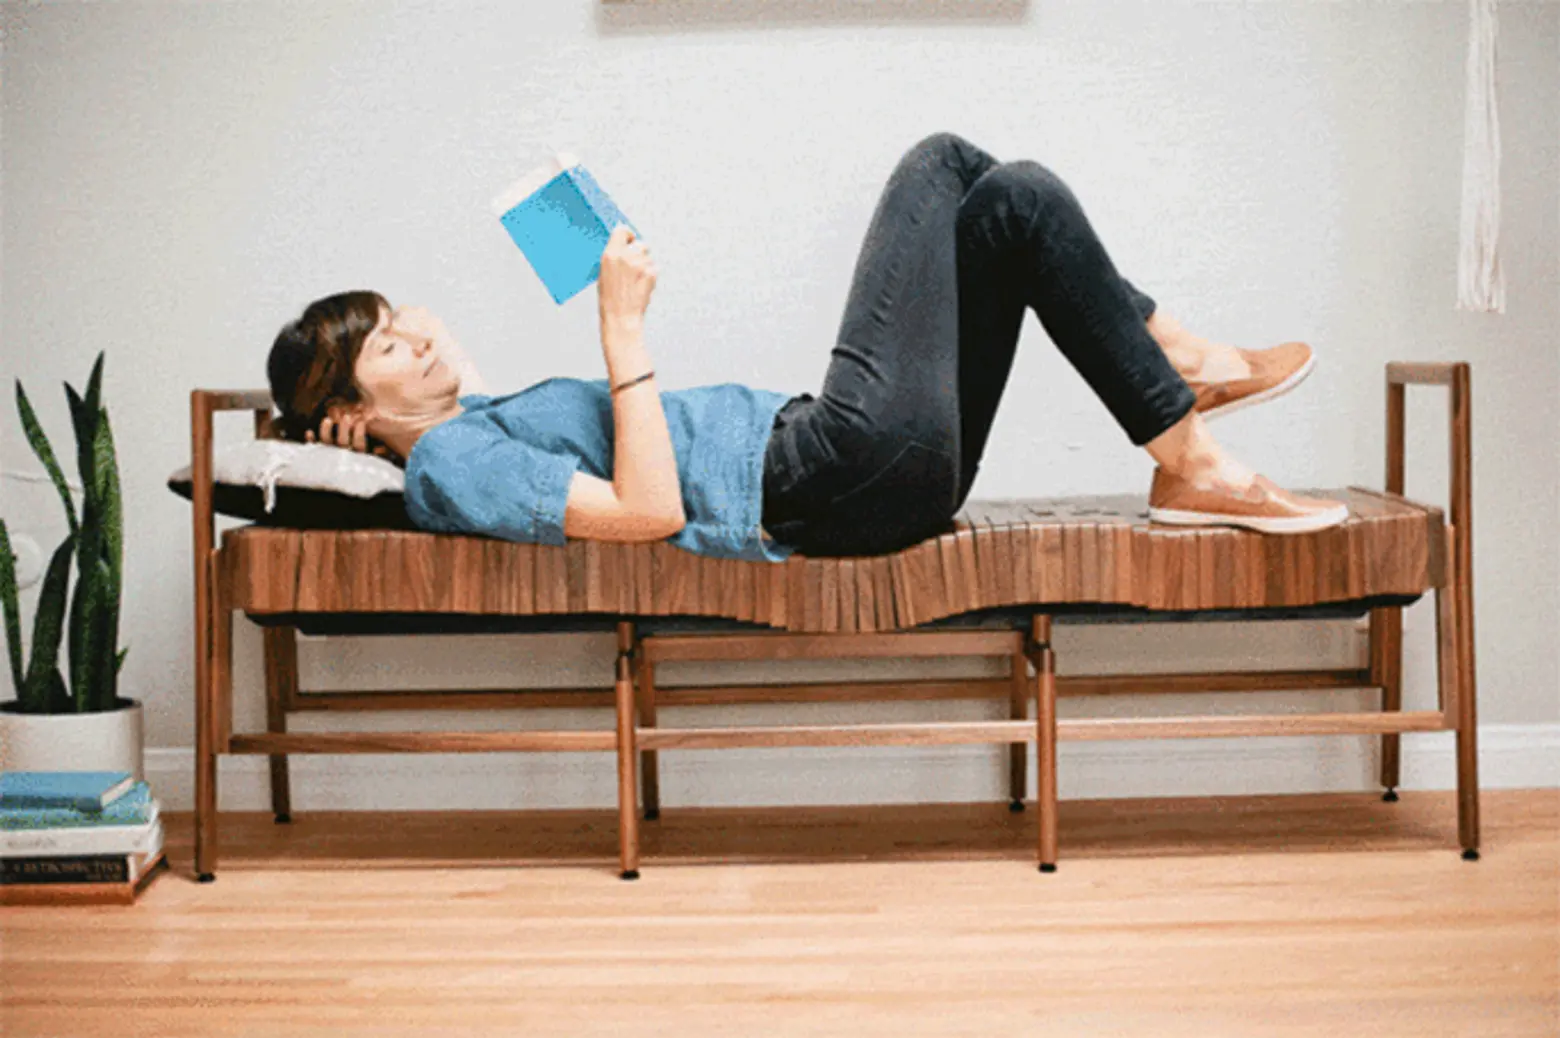 Sitskie’s Innovative Wood Furniture Mimics Memory Foam to Conform to Your Body